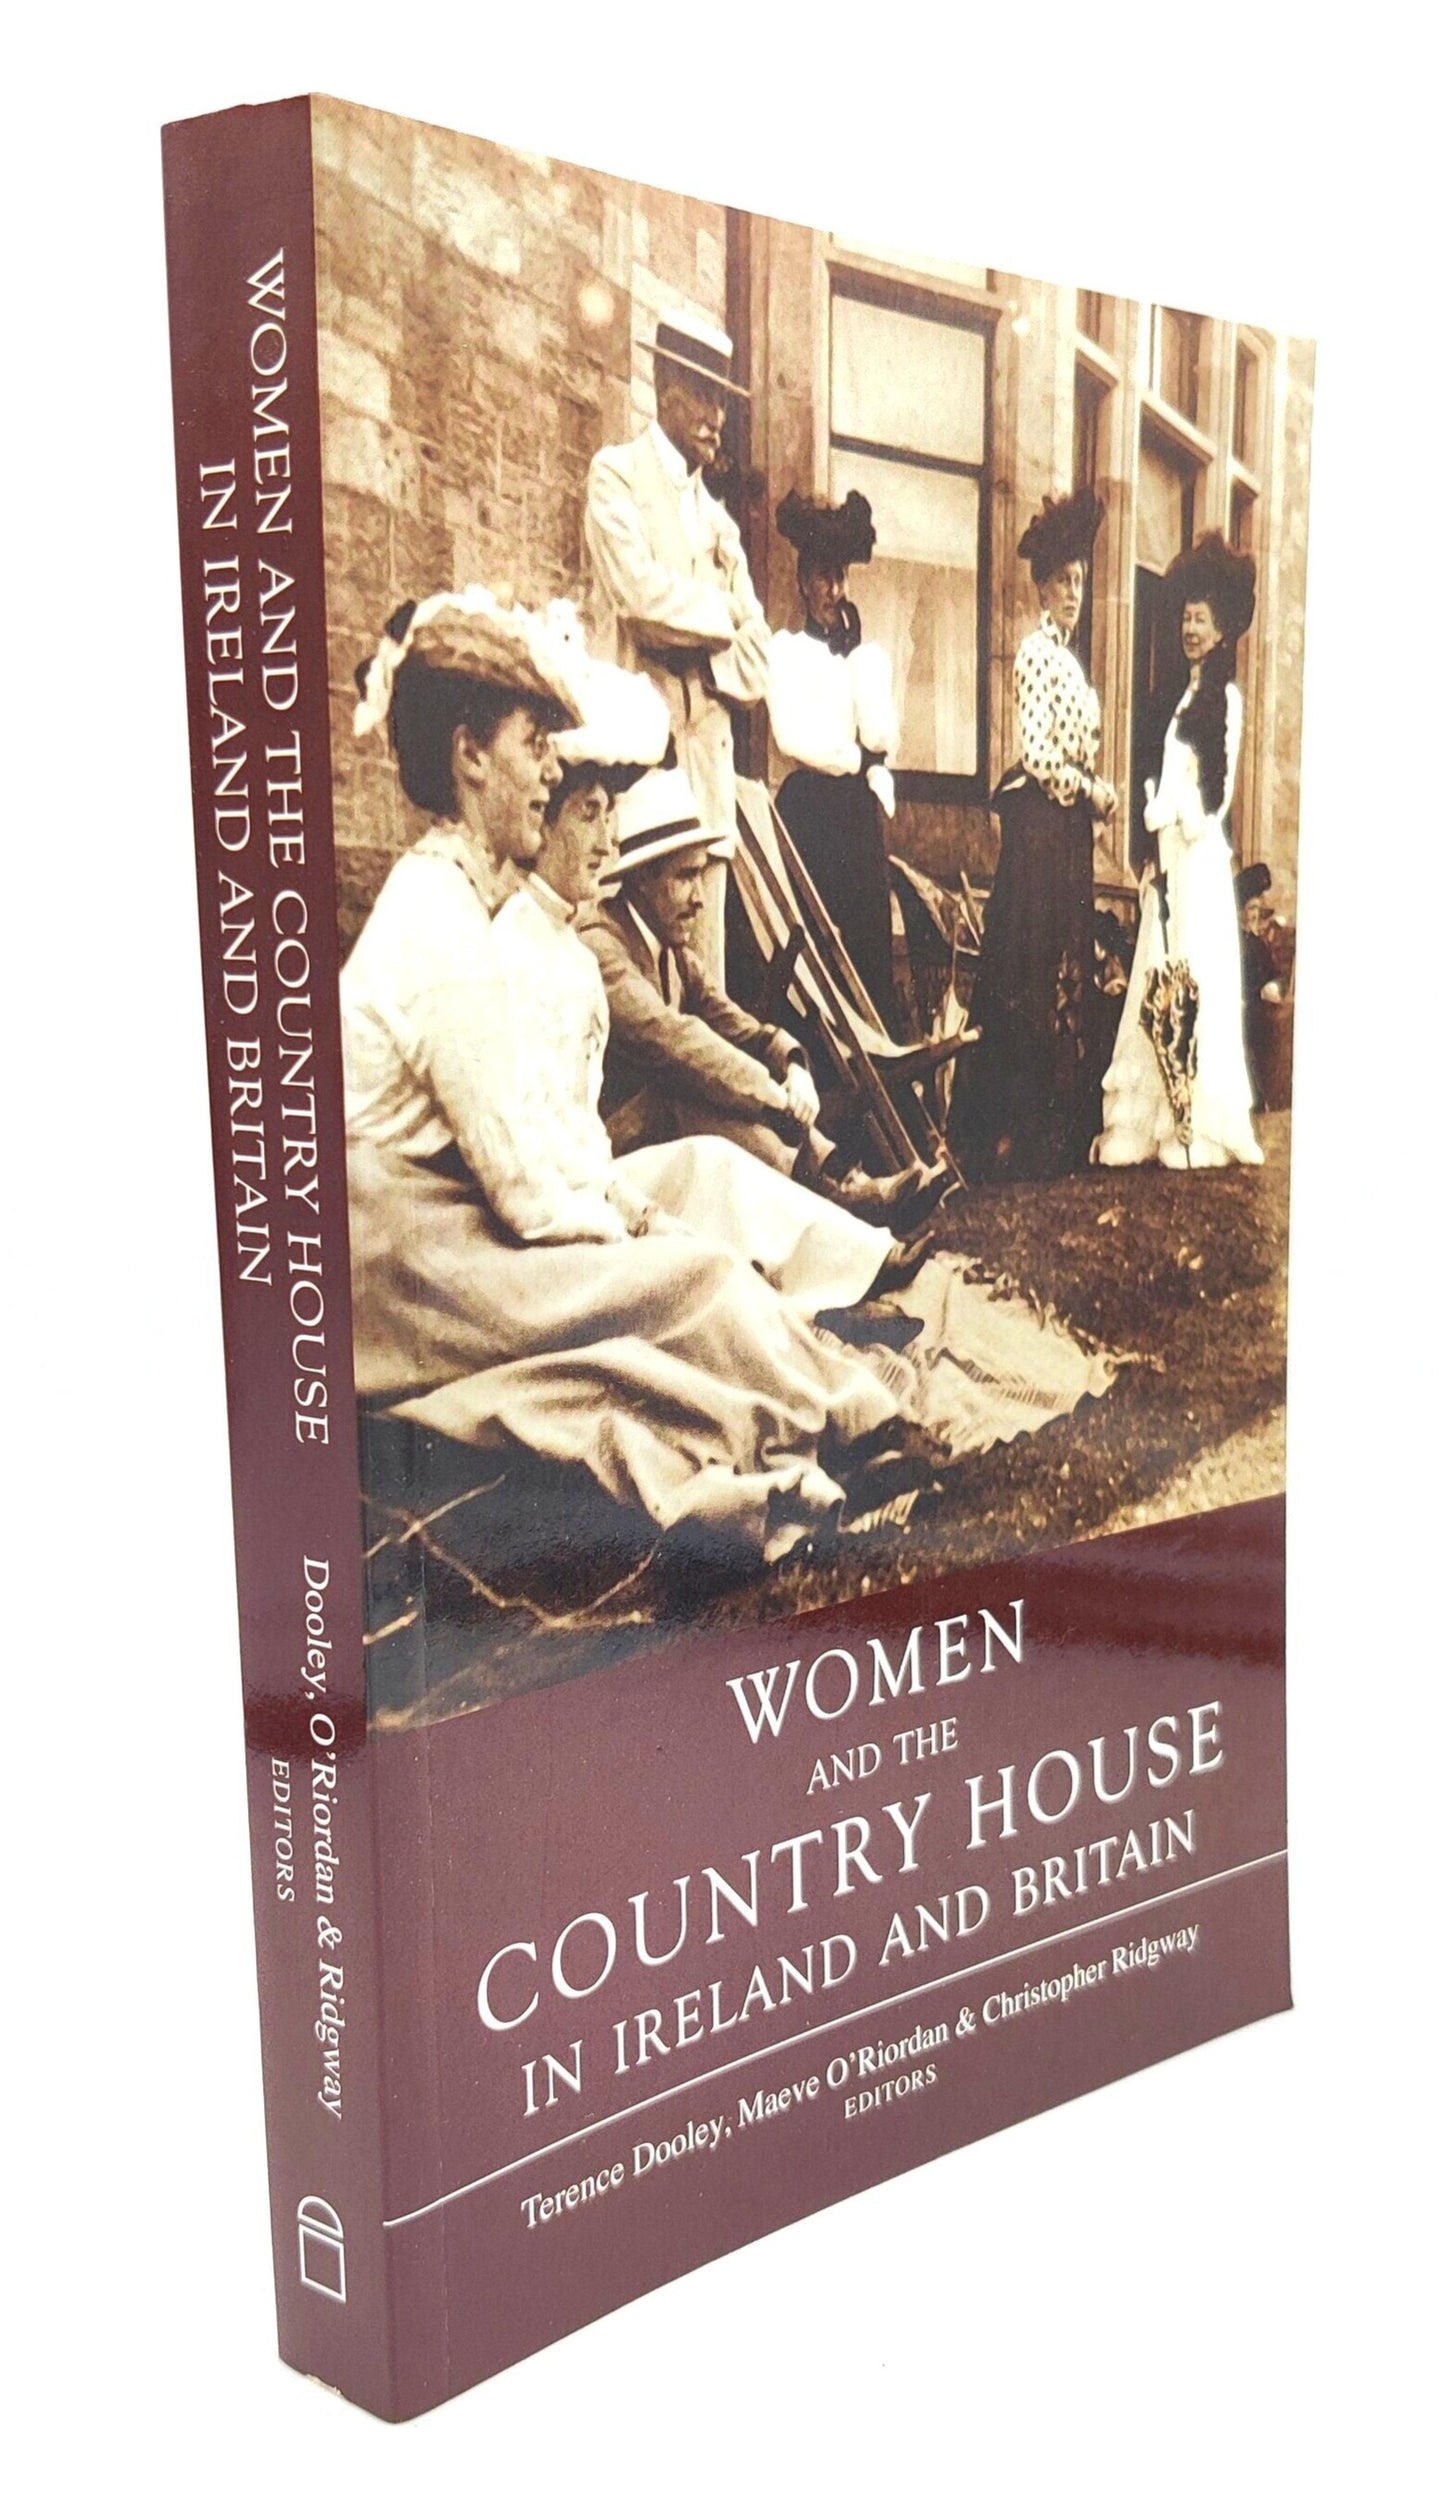 Women and the County House in Ireland and Britain Paperback Book